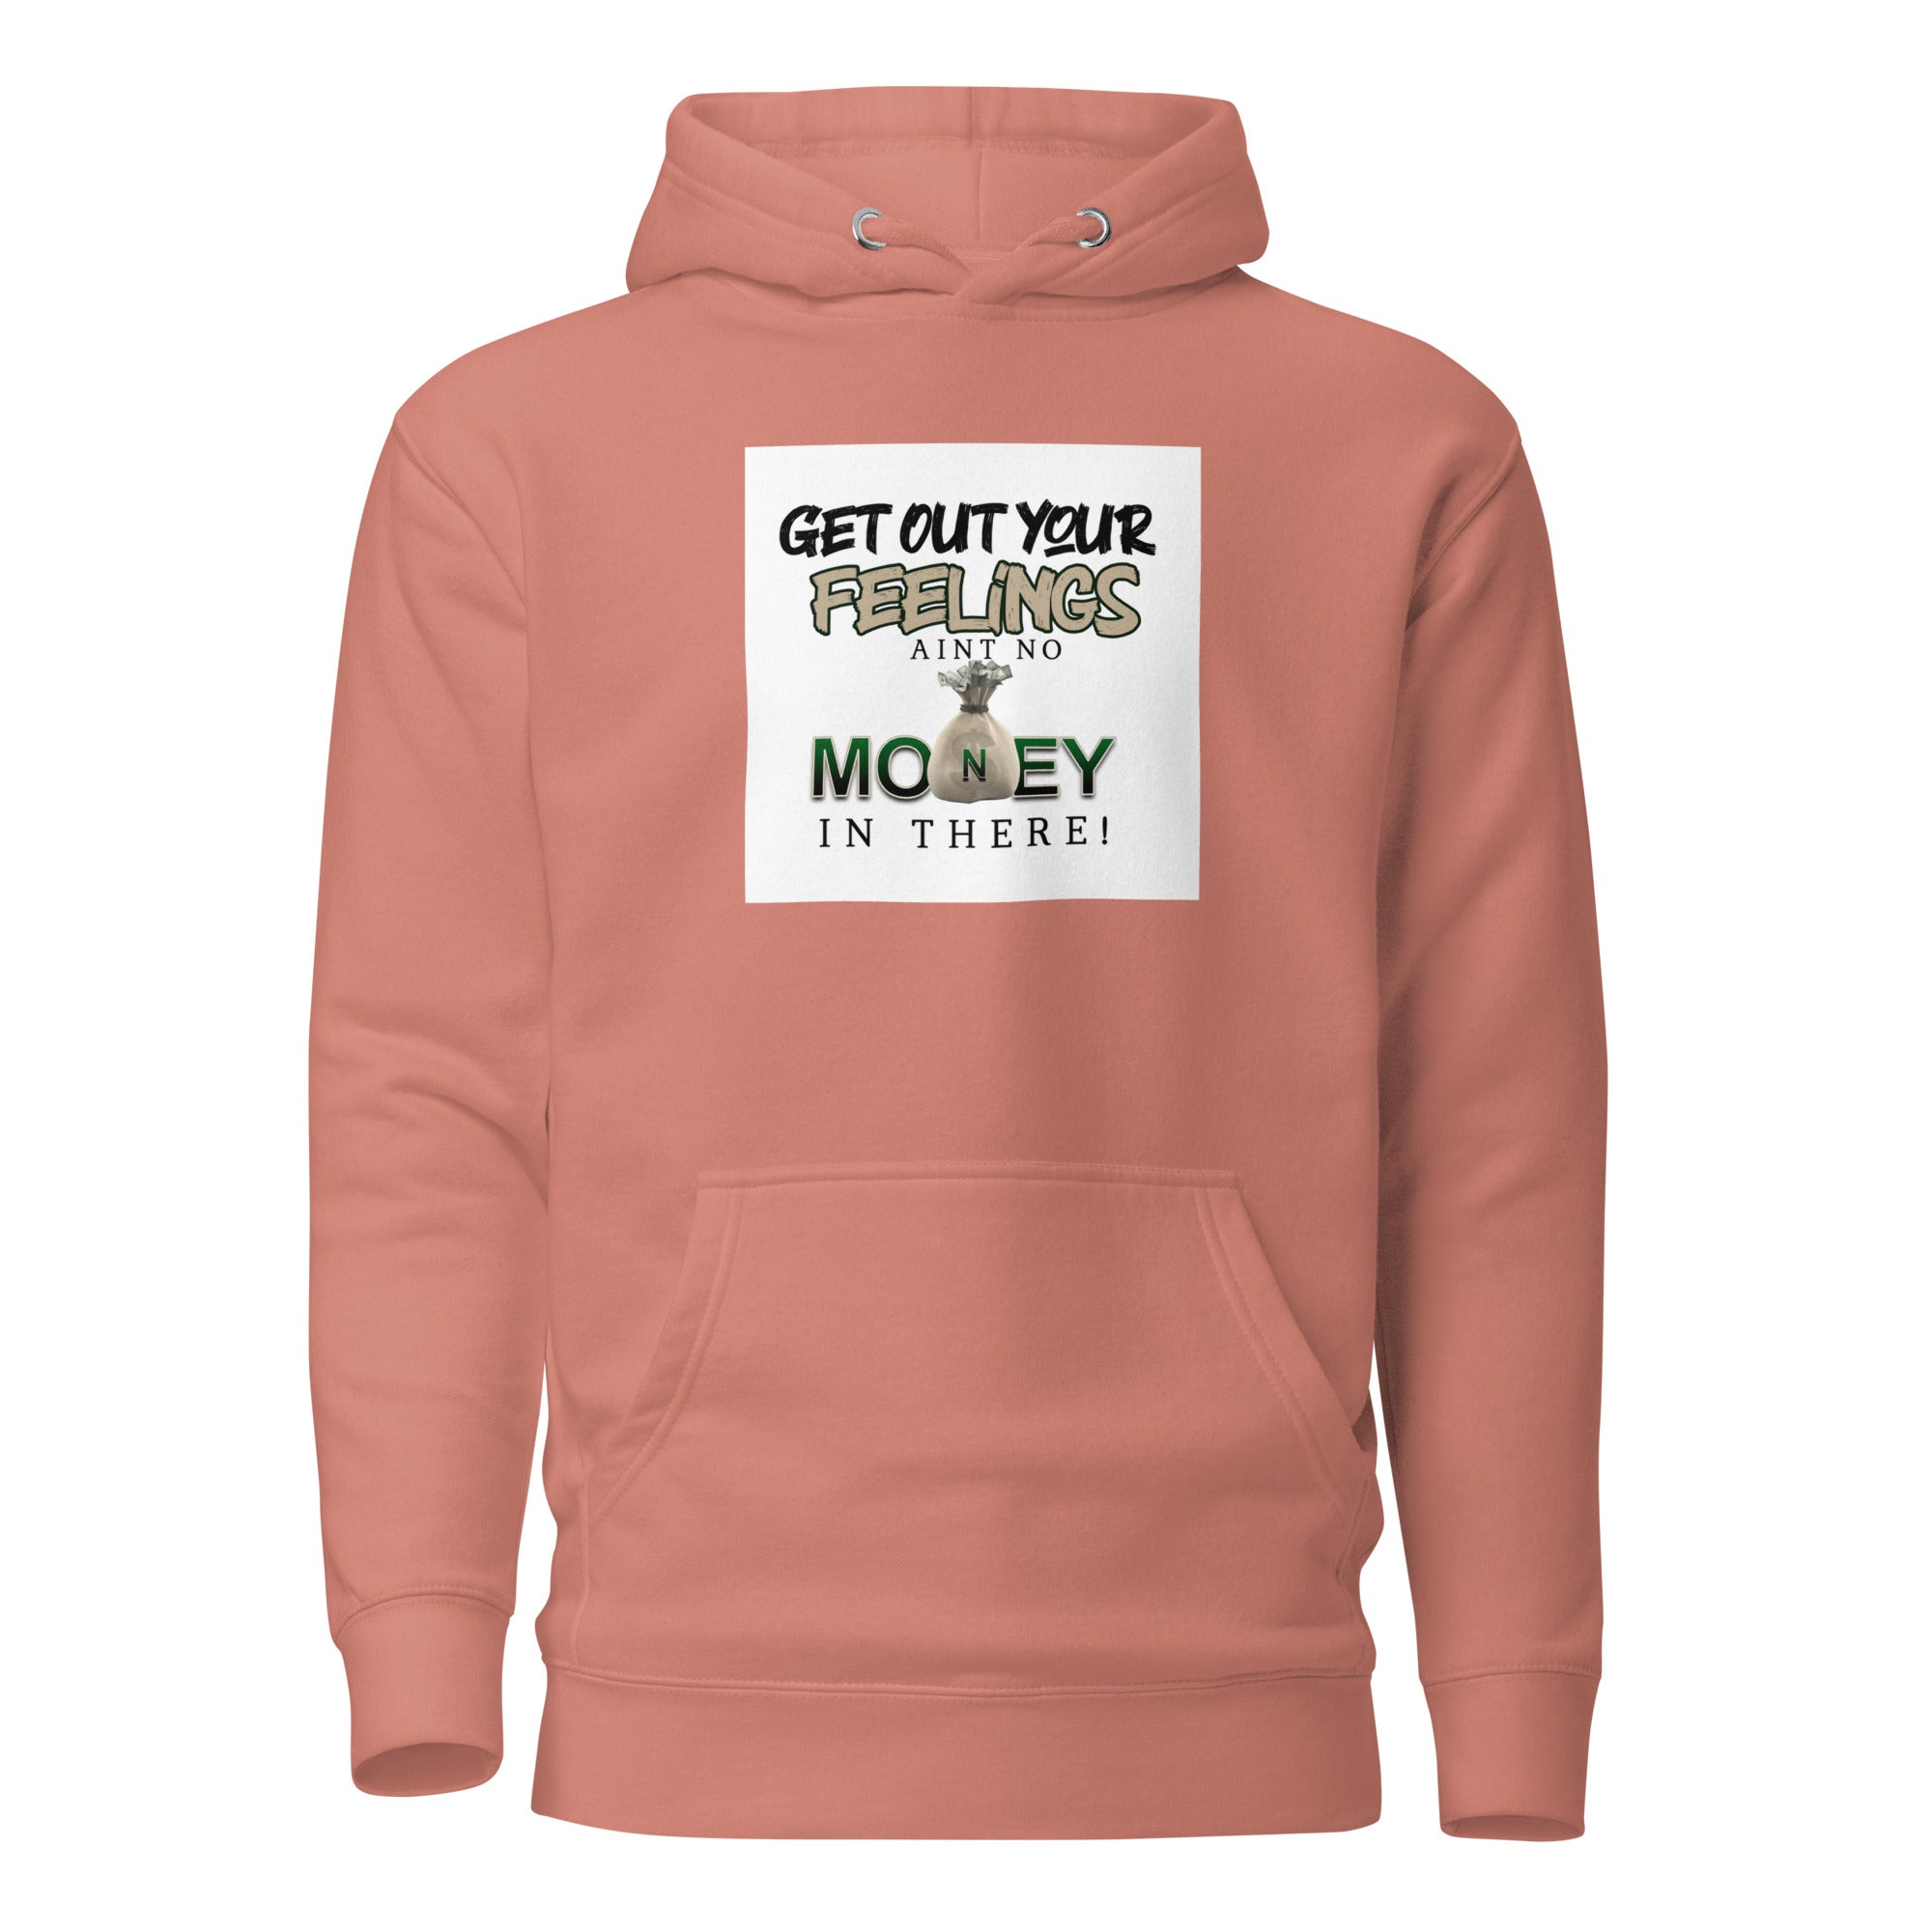 Men's Graphic Hoodie "Get out your feeling ain't no money there"